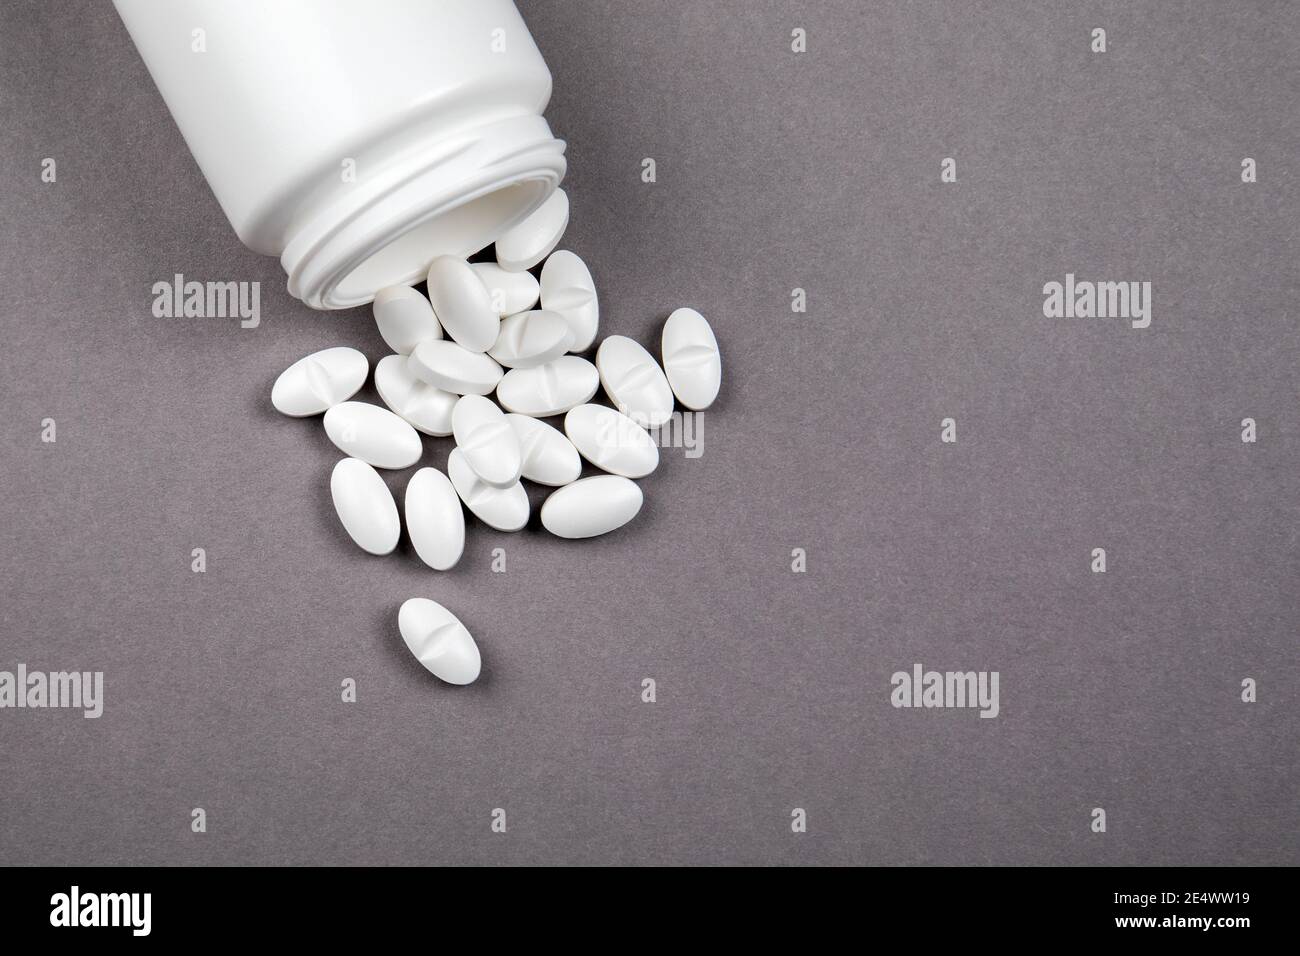 Page 5 - Medications High Resolution Stock Photography and Images - Alamy